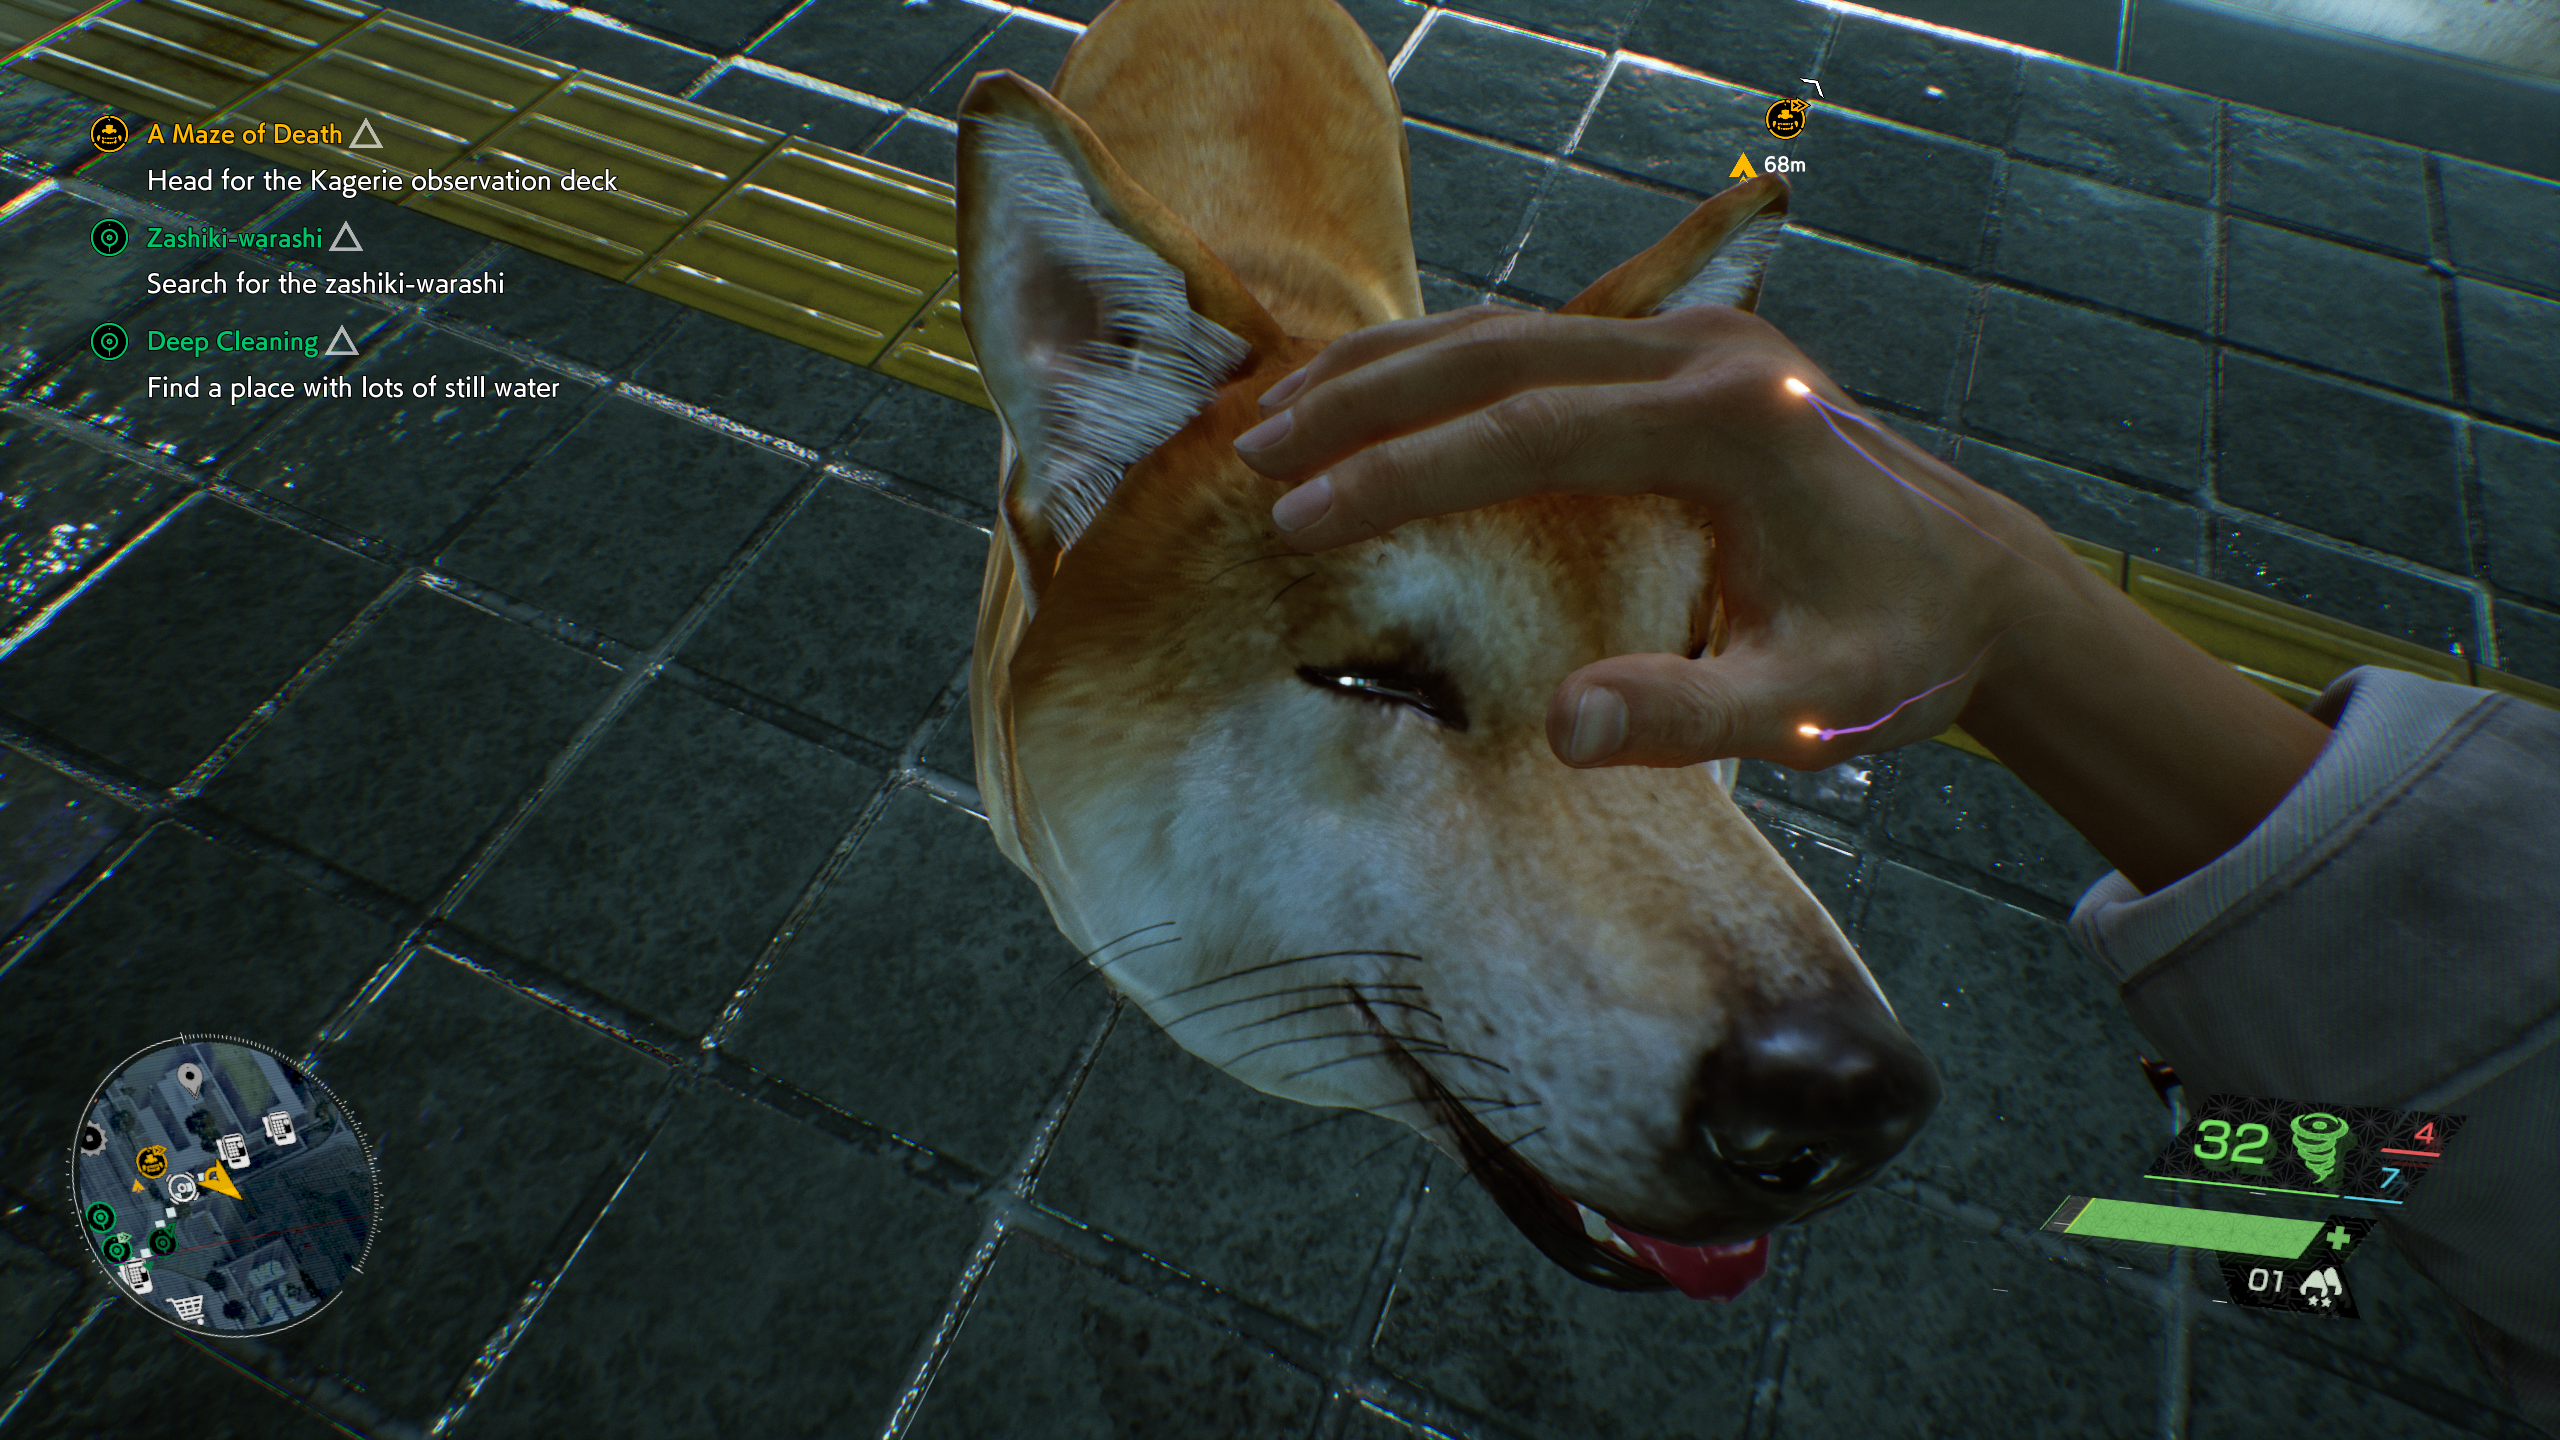 You can pet the dog in Ghostwire: Tokyo.